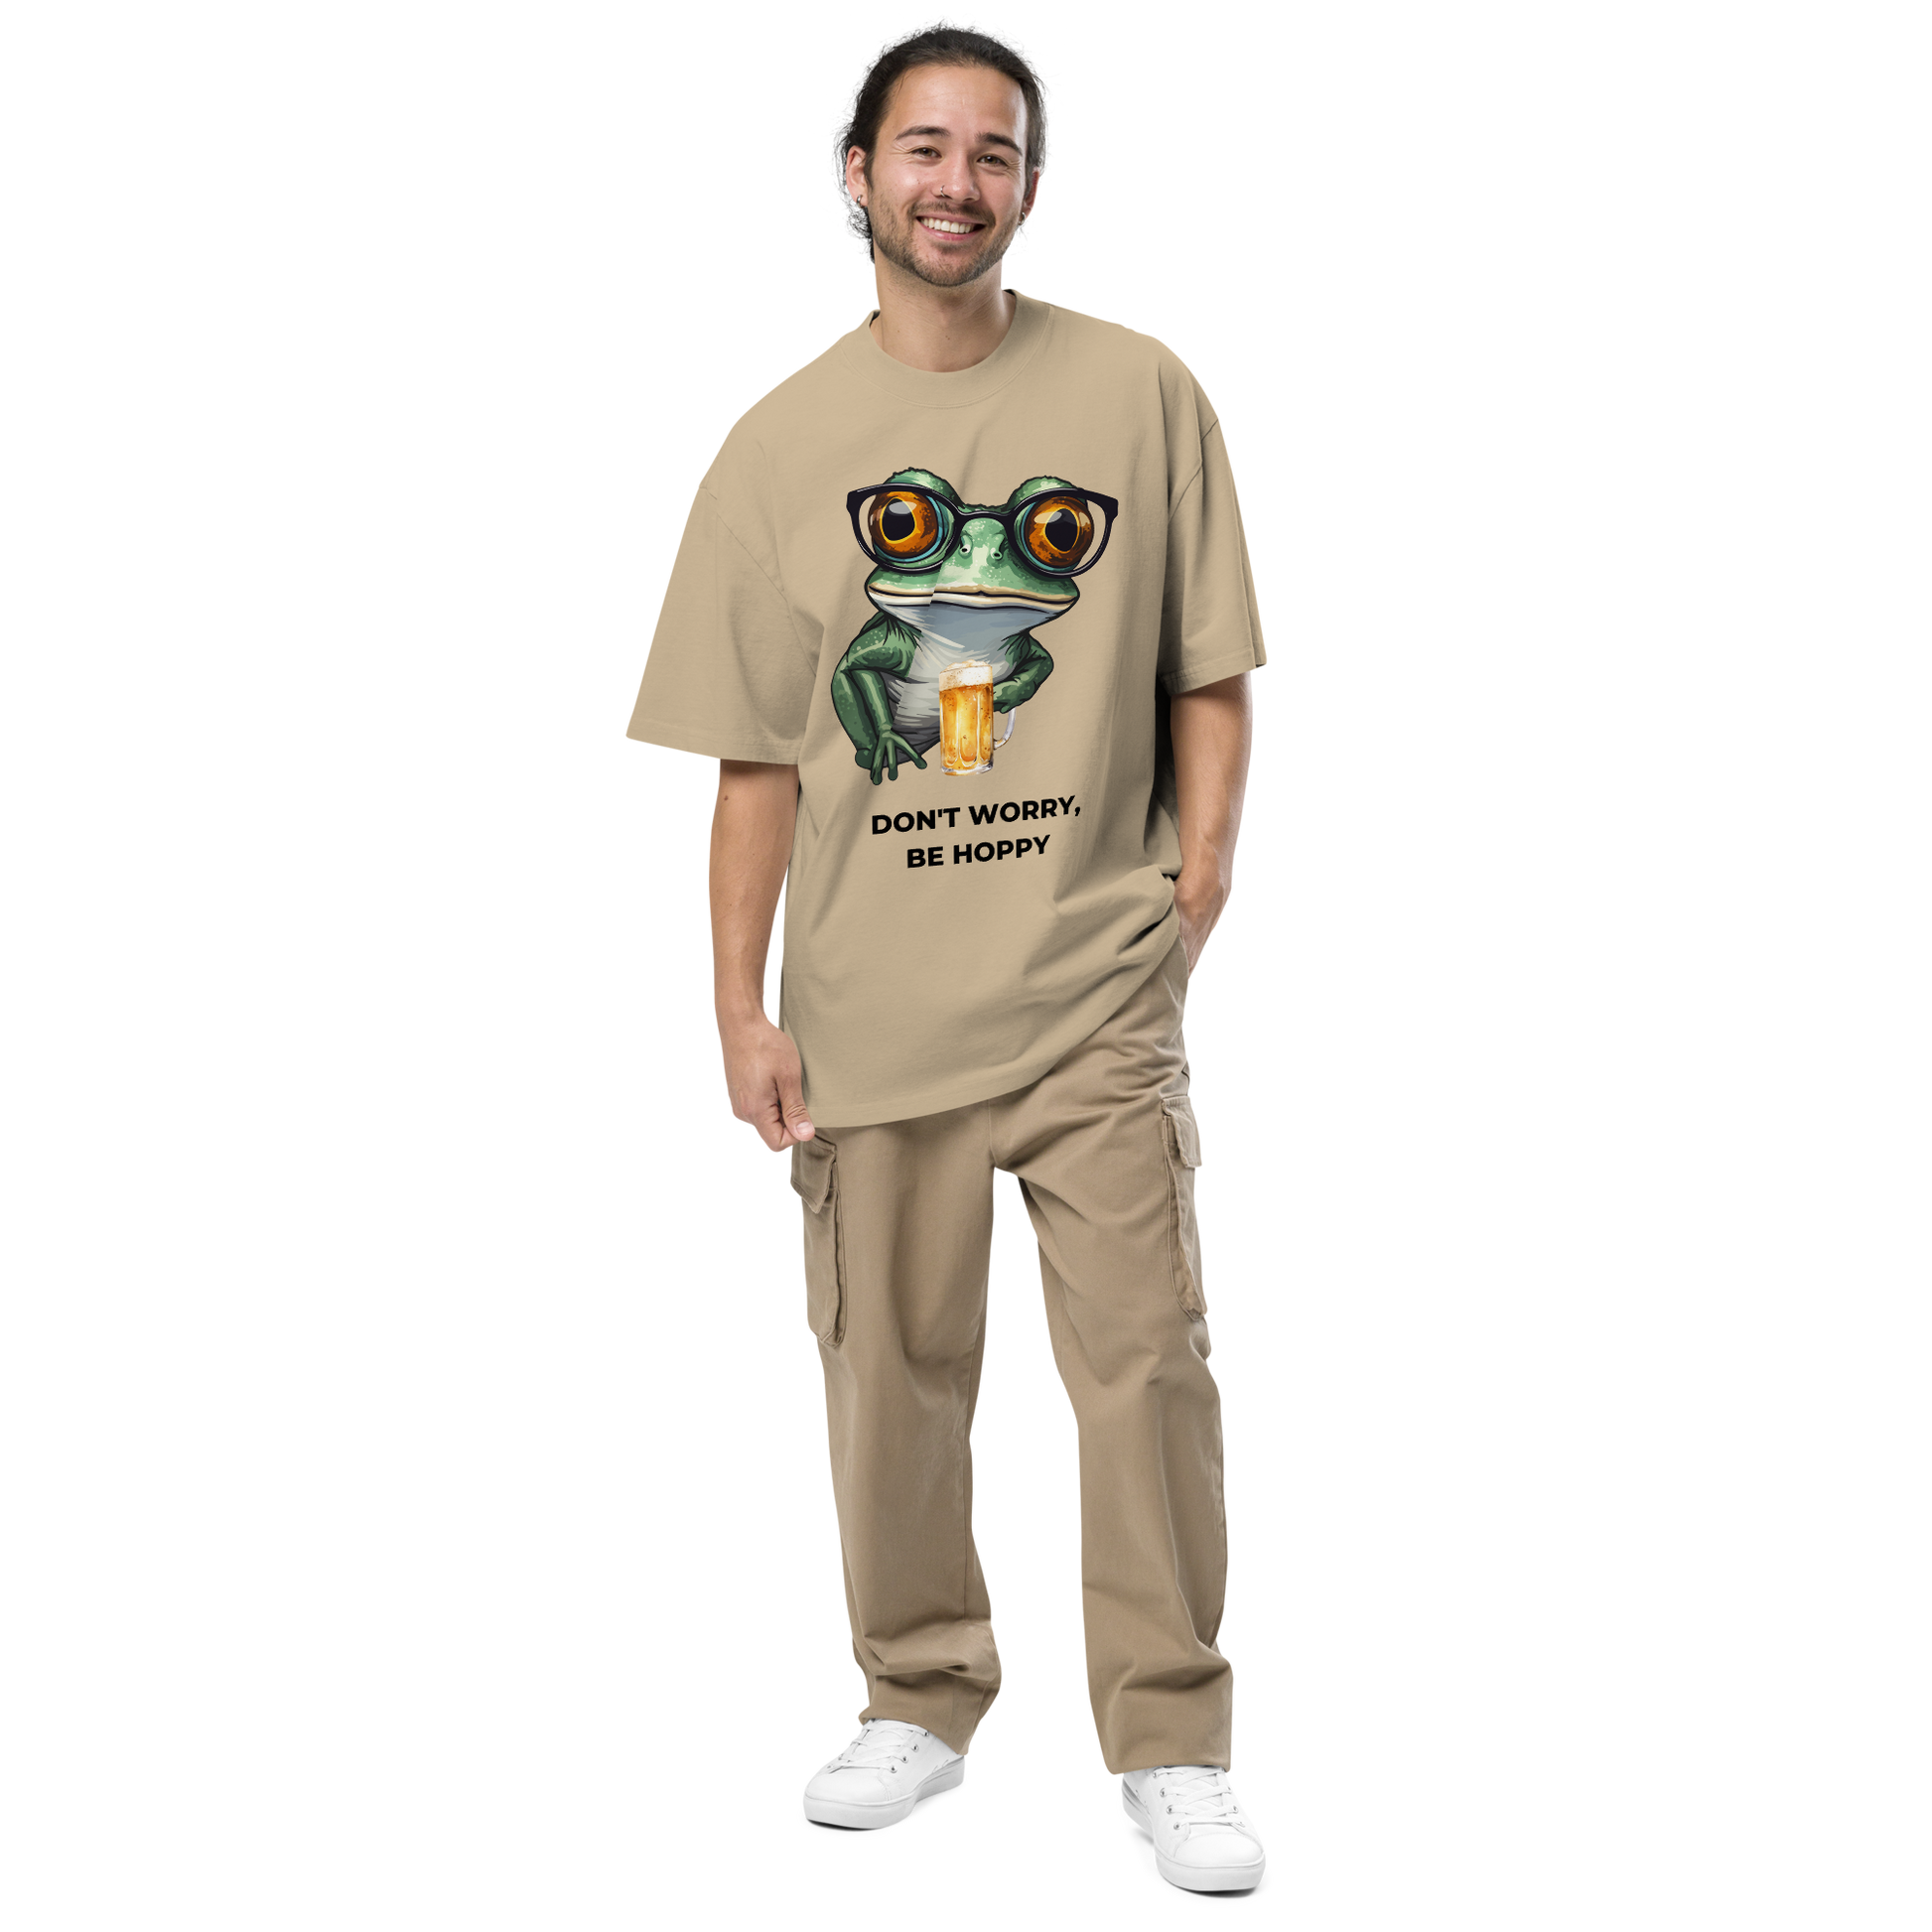 Smiling man wearing a Faded Khaki Frog Oversized T-Shirt featuring a ribbitting Don't Worry, Be Hoppy graphic on the chest - Funny Graphic Frog Oversized Tees - Boozy Fox